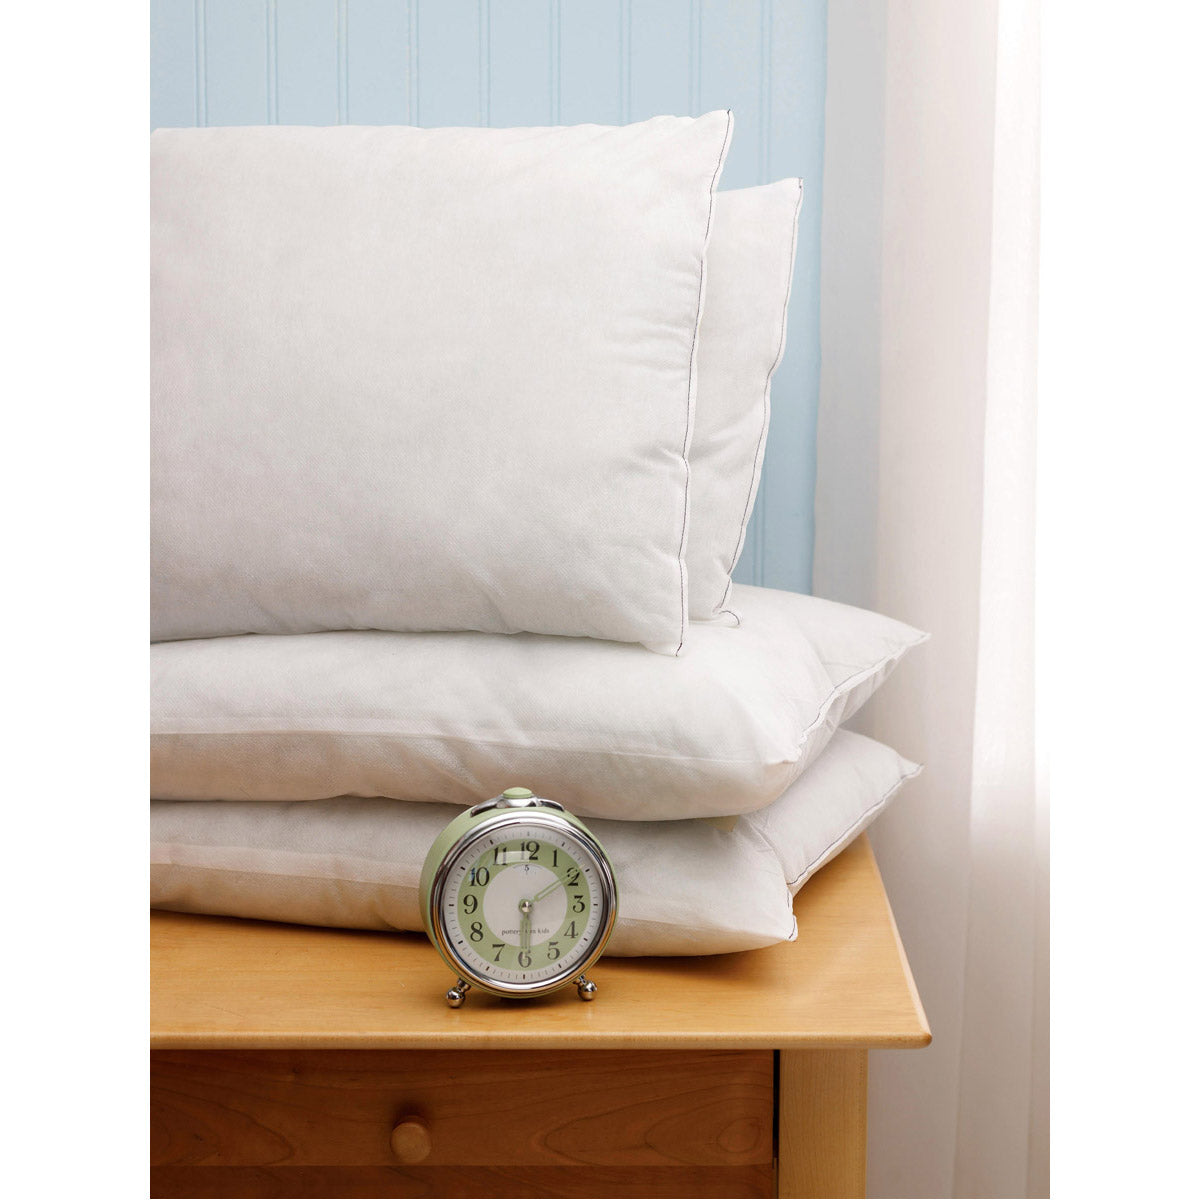 Pillow Disposable 18X24 Med Wt